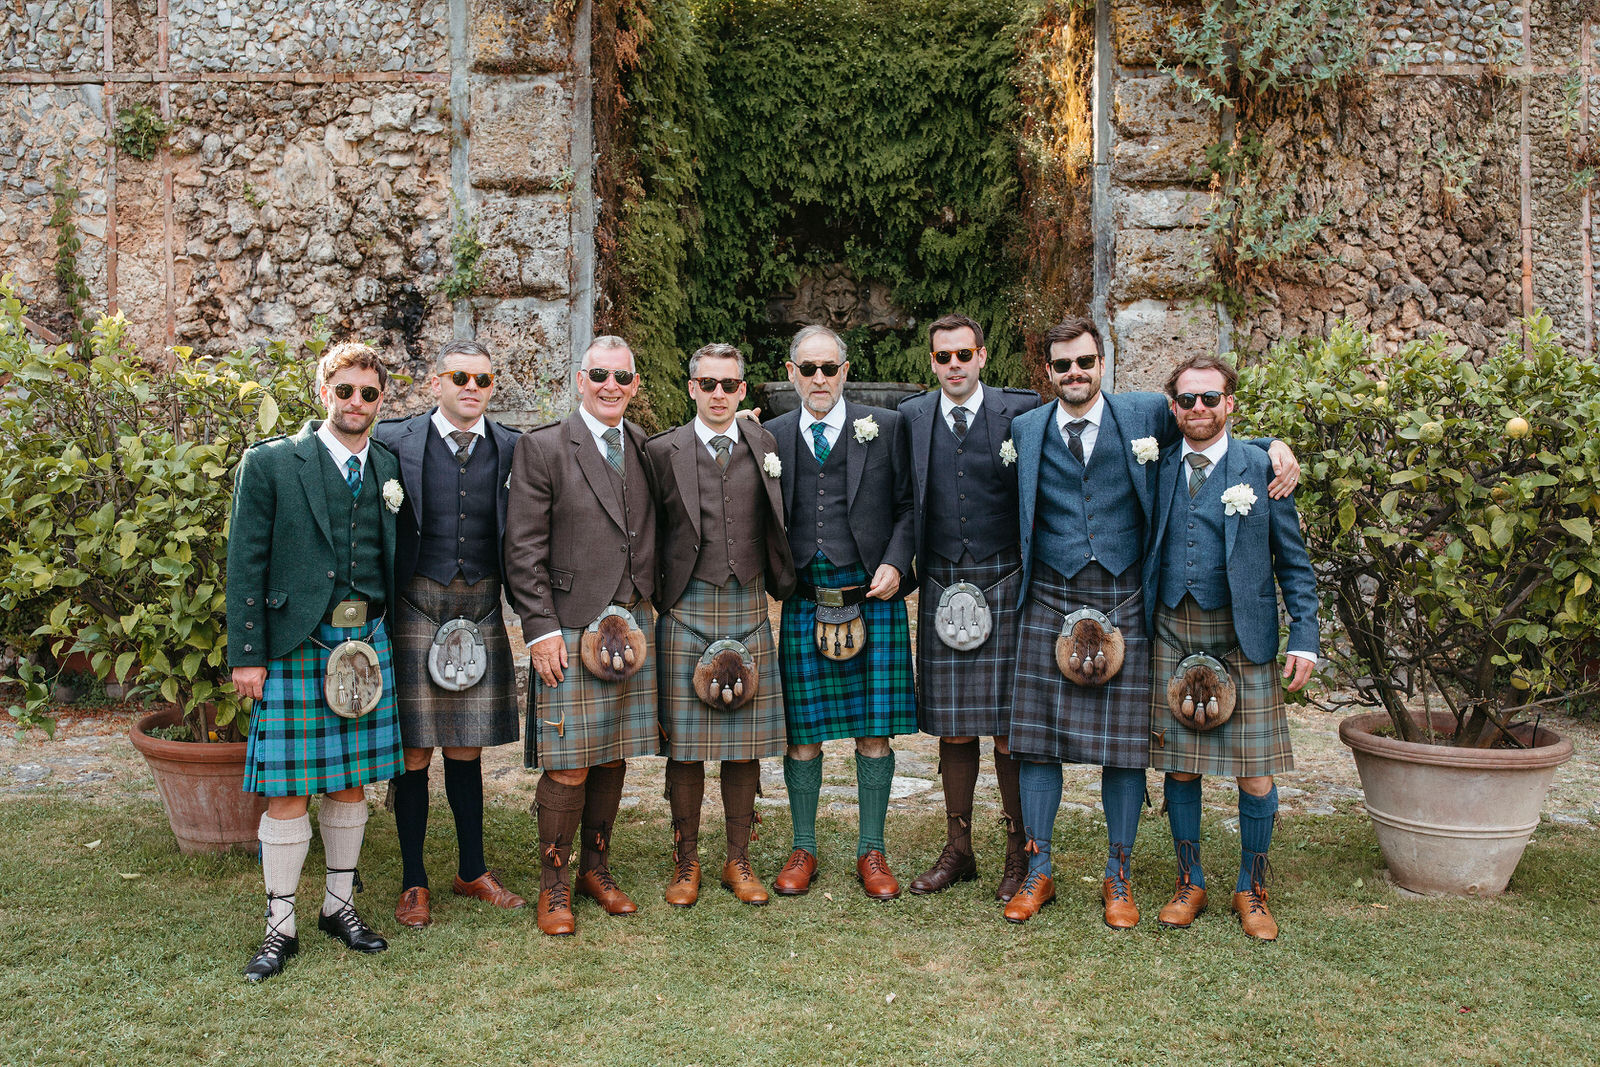 Tying the Knot in Tuscany: A Magical Scottish Wedding on a Full Moon Night